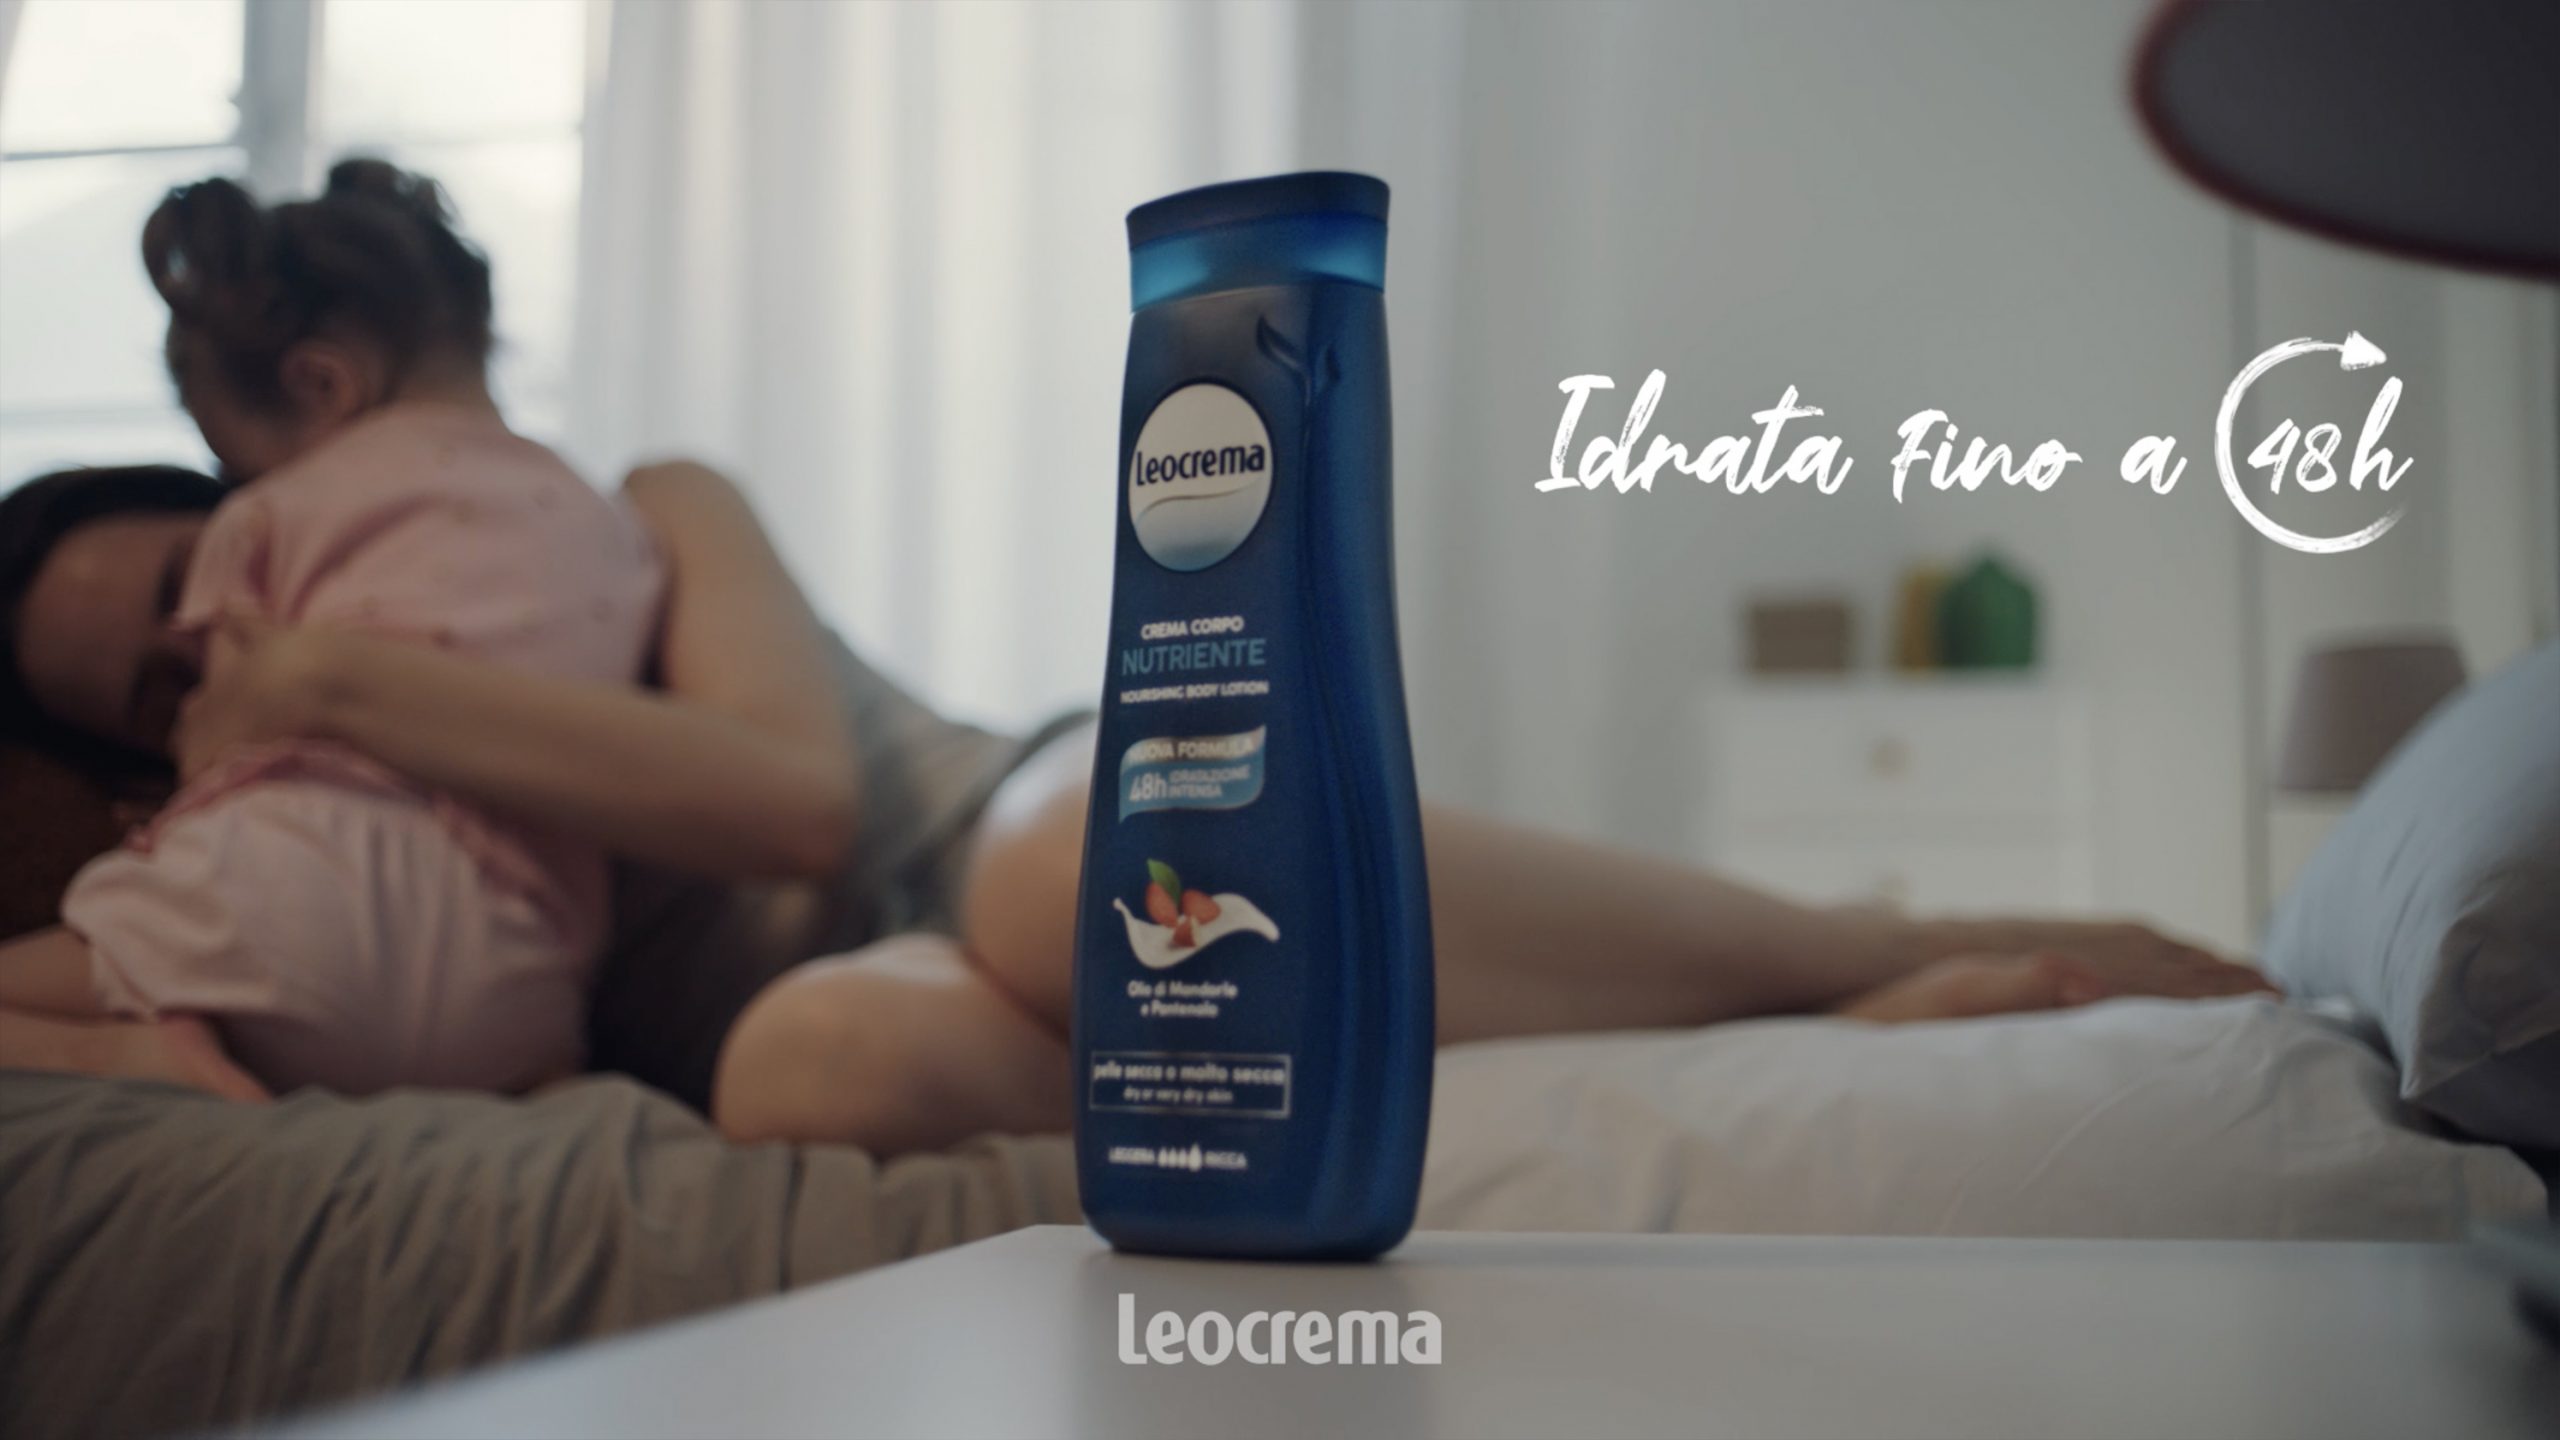 LEOCREMA AND INTESTA, TOGETHER TO LOVE YOURSELF IN YOUR OWN SKIN